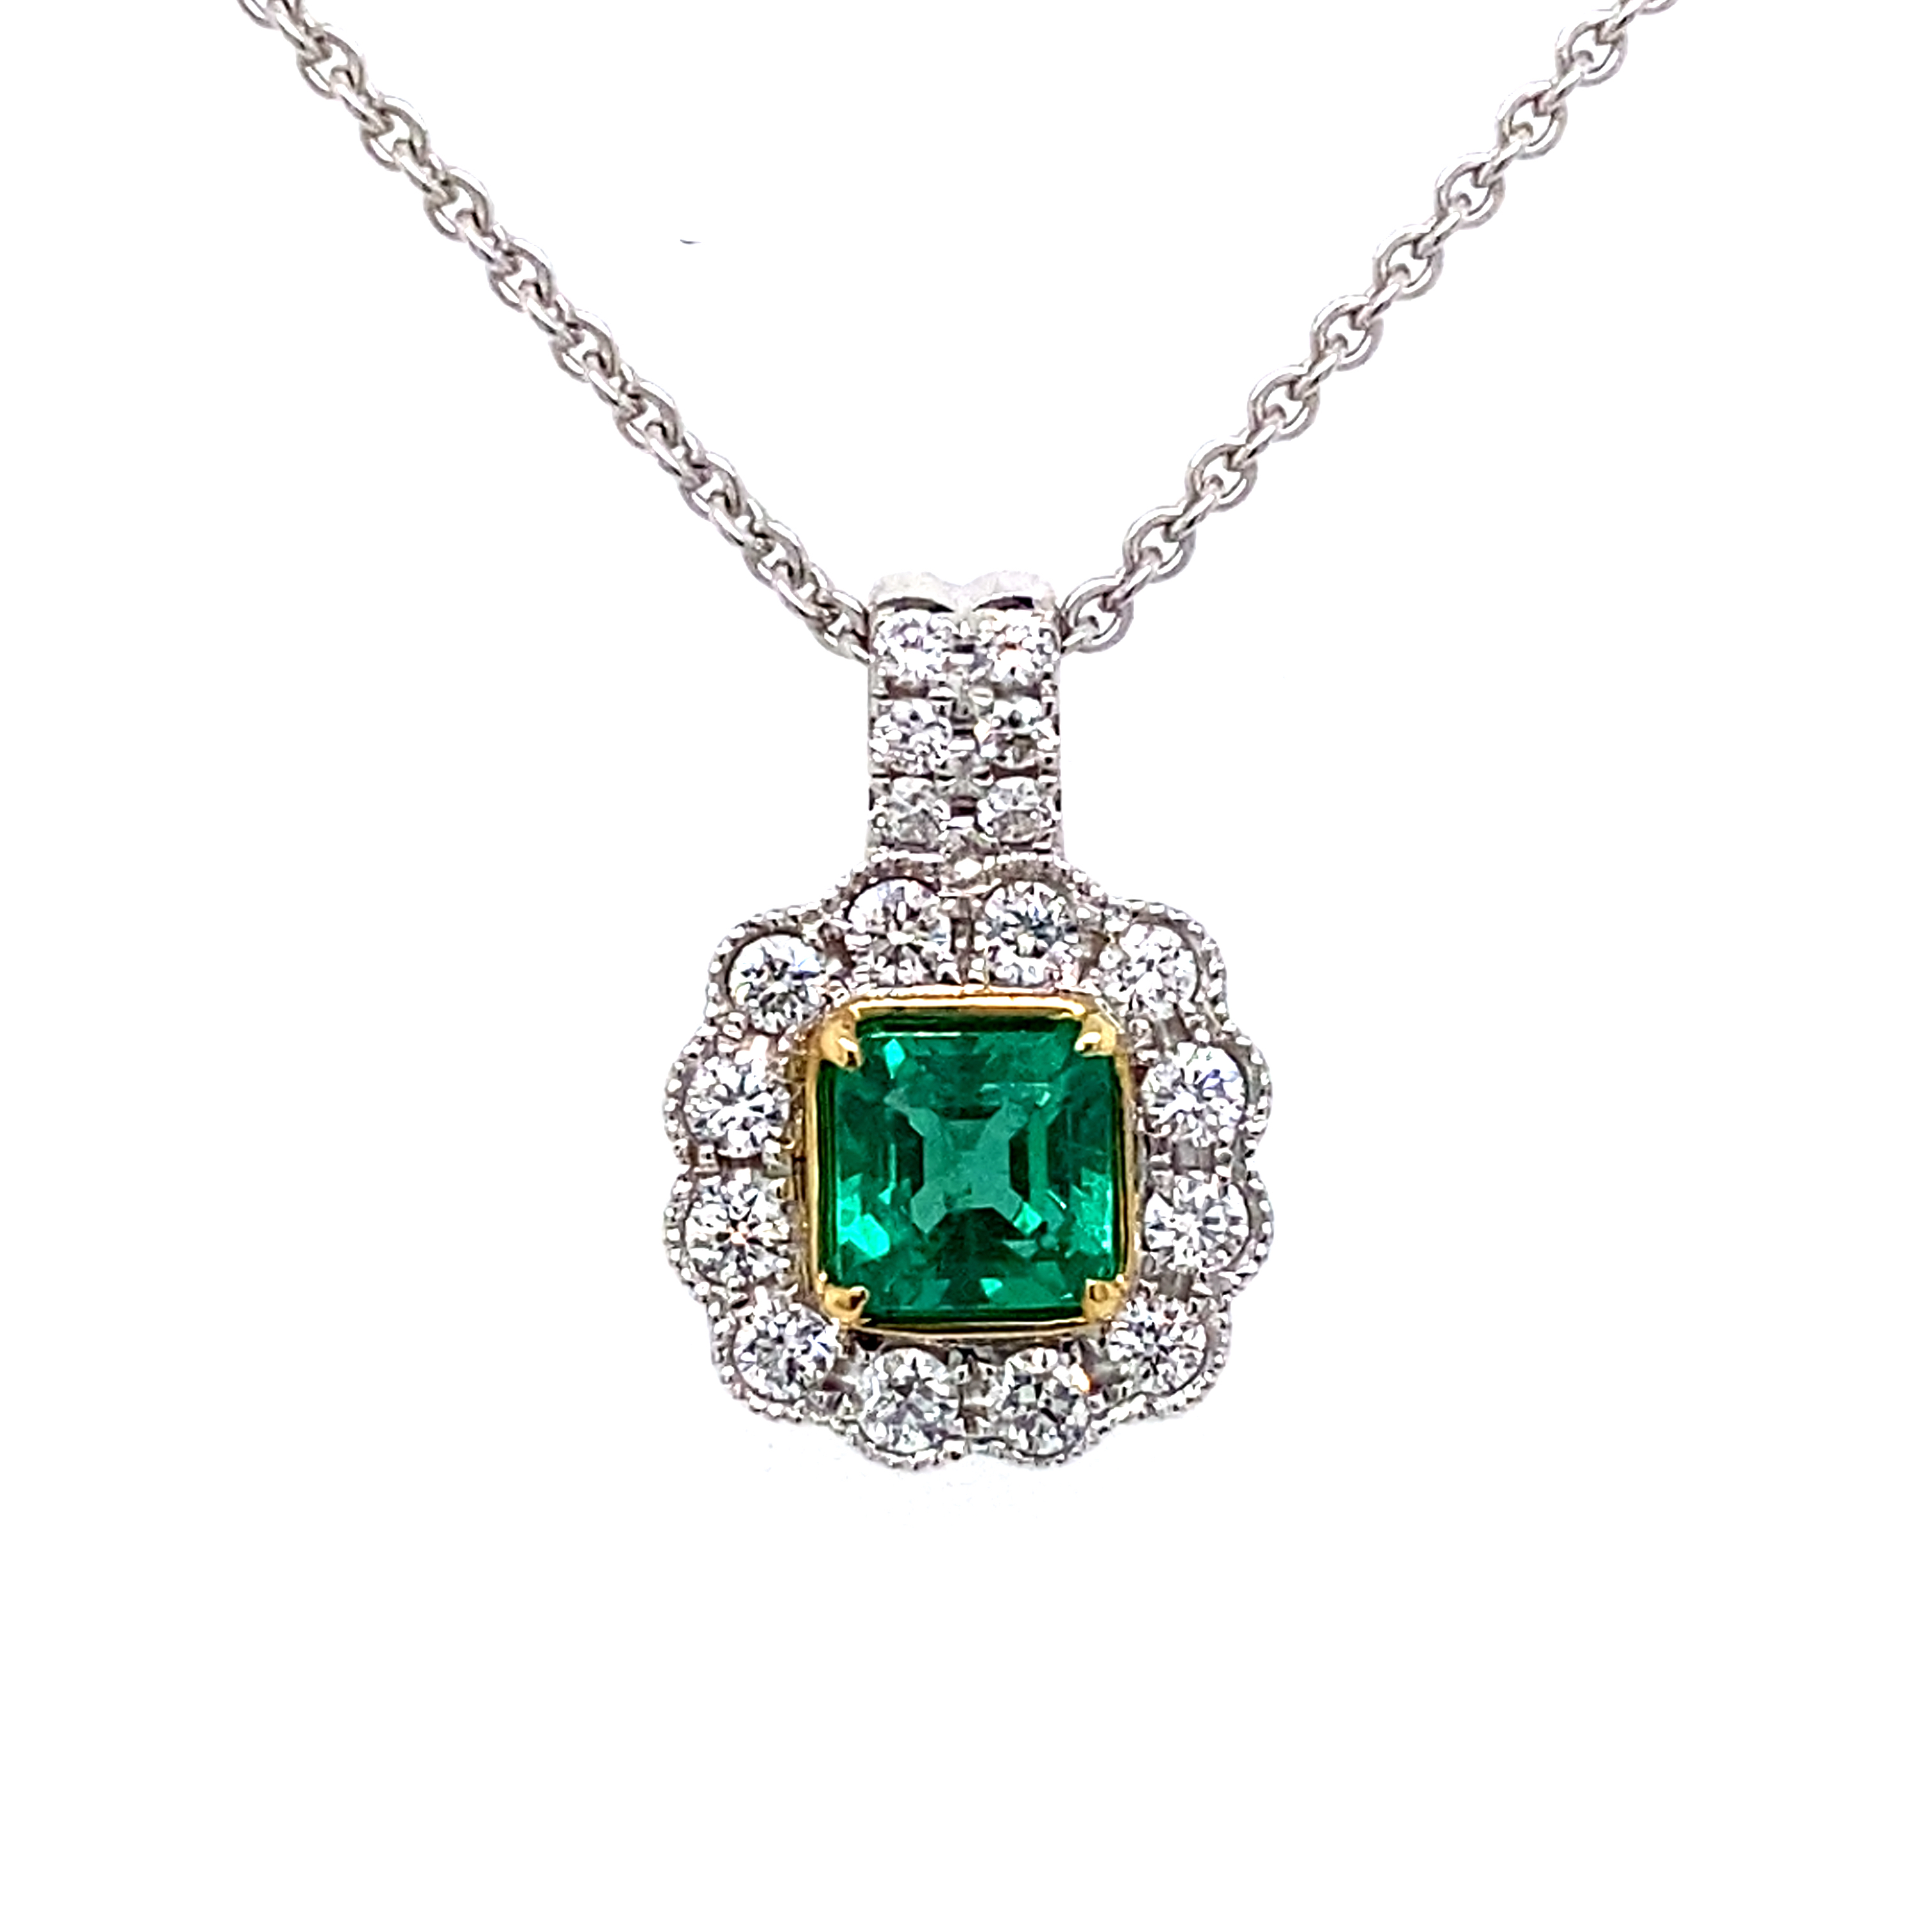 18ct white gold Emerald 0.47ct and Diamond Vintage style pendant